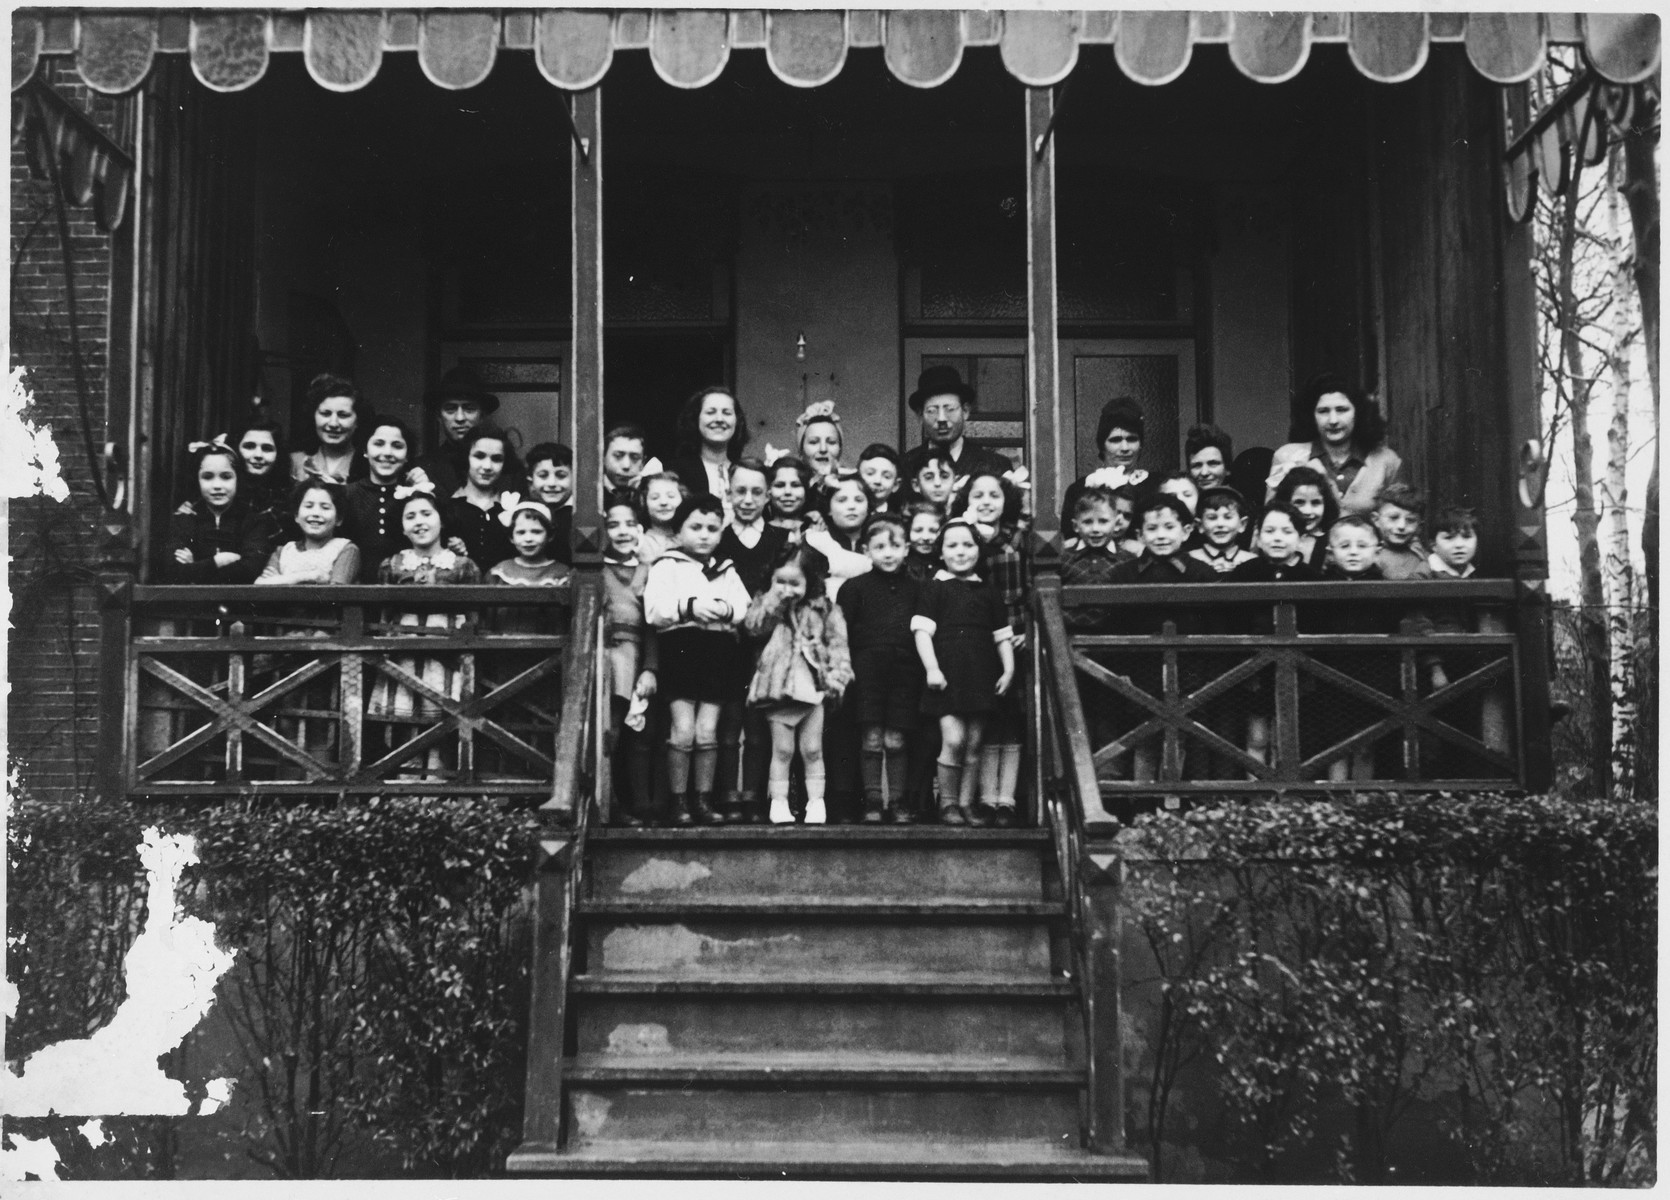 Group portrait of the children and staff of the Mariaburg DP children's home near Antwerp.

Among those pictured are Jonas and Ruth Tiefenbrunner. To their left is another teacher, Miriam Zupnick.  In front is their daughter Jannette.